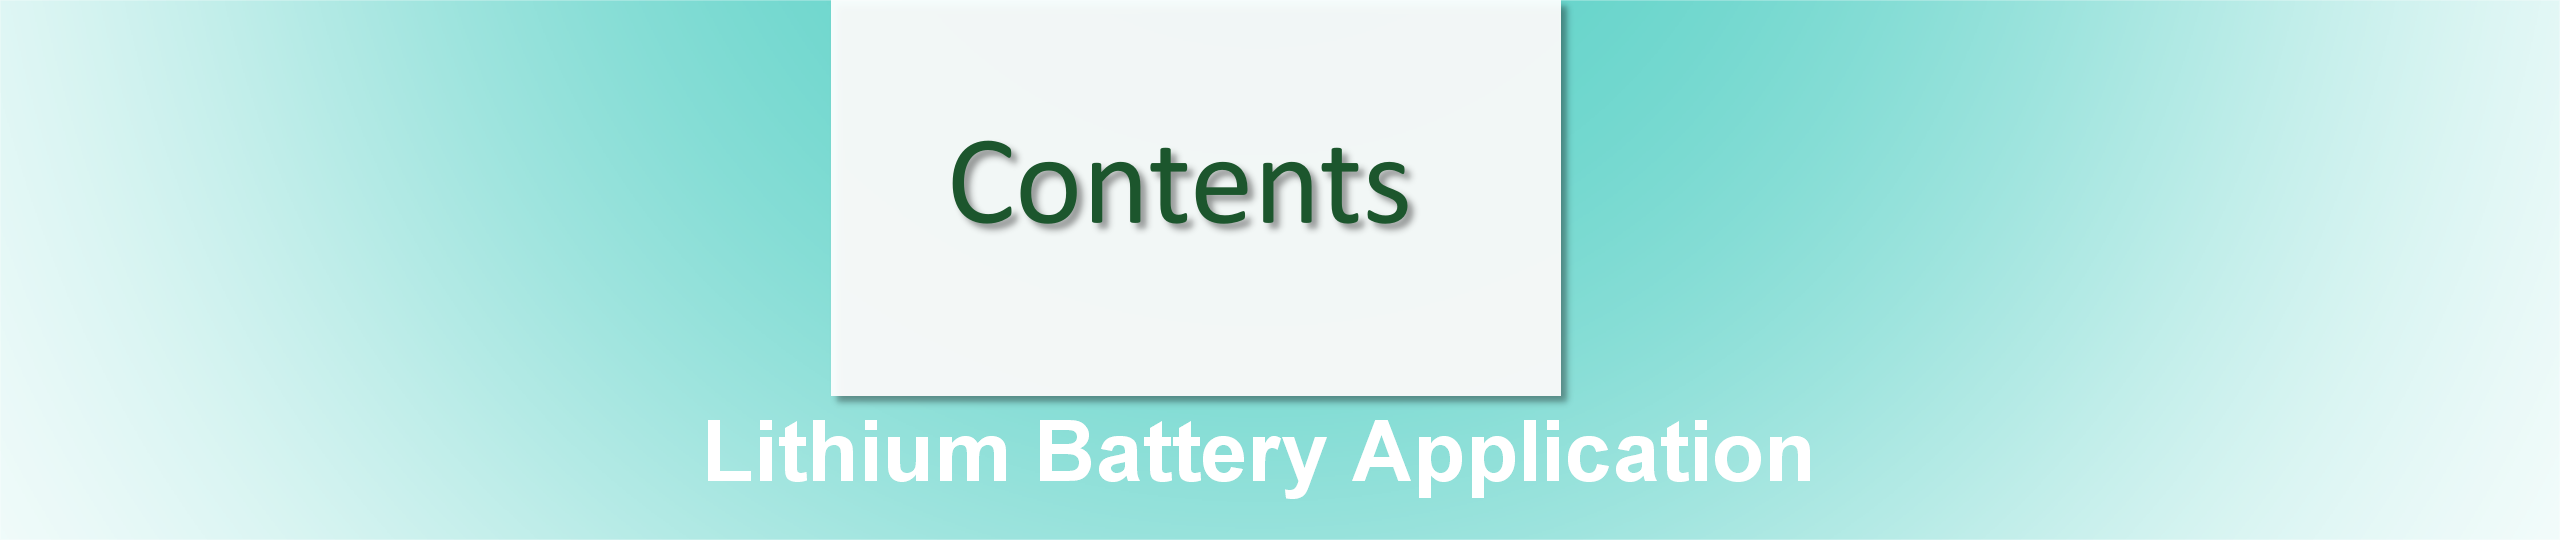 Lithium Battery Application